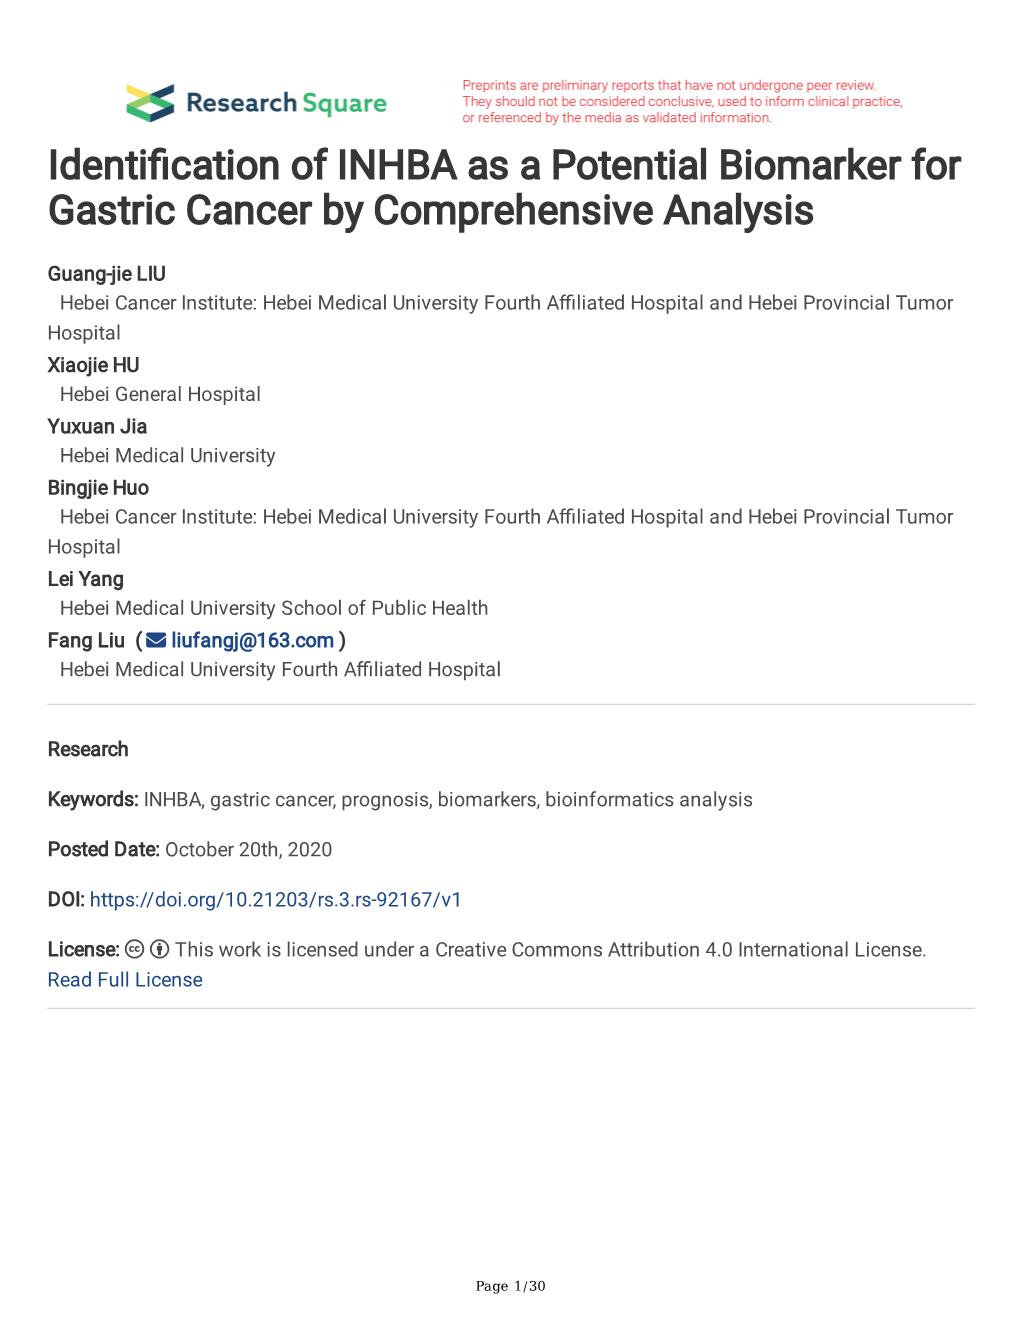 Identi Cation of INHBA As a Potential Biomarker for Gastric Cancer By